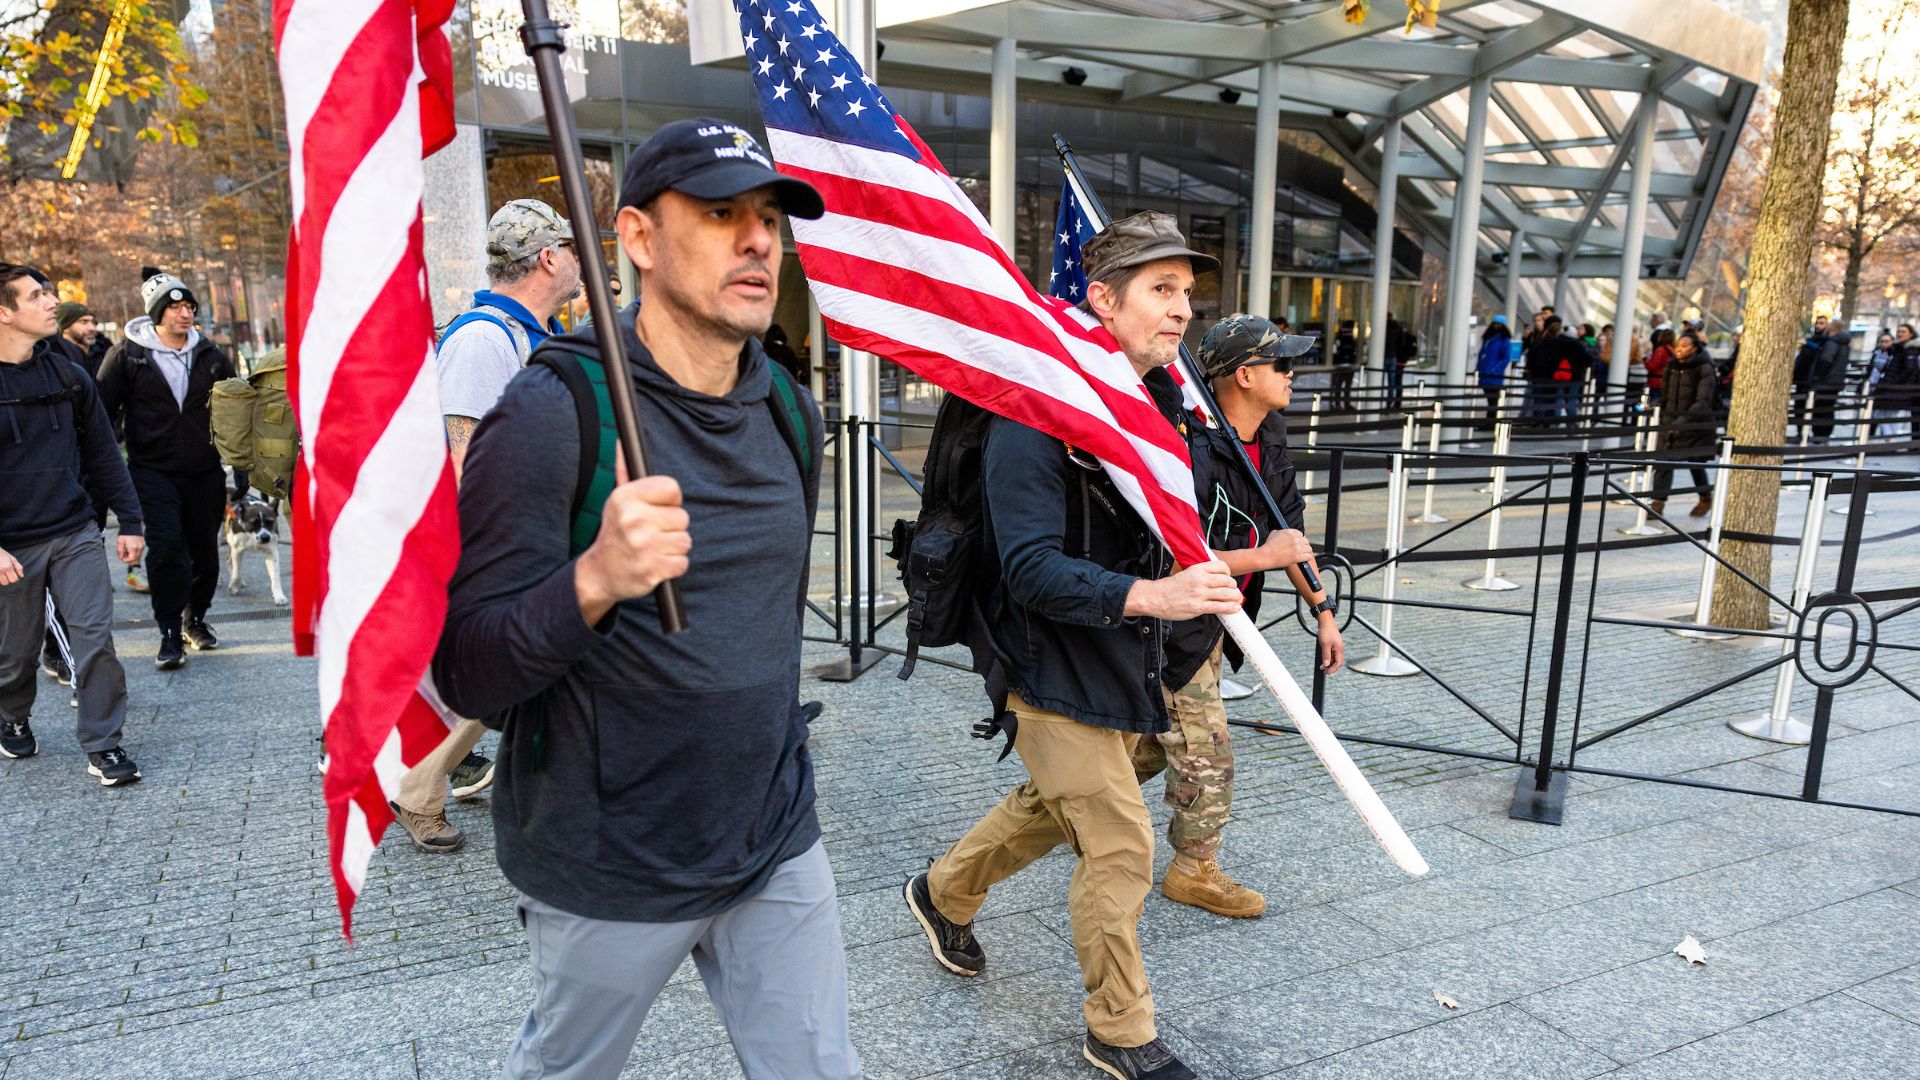 Ruck participants carry American flags onto the Plaza